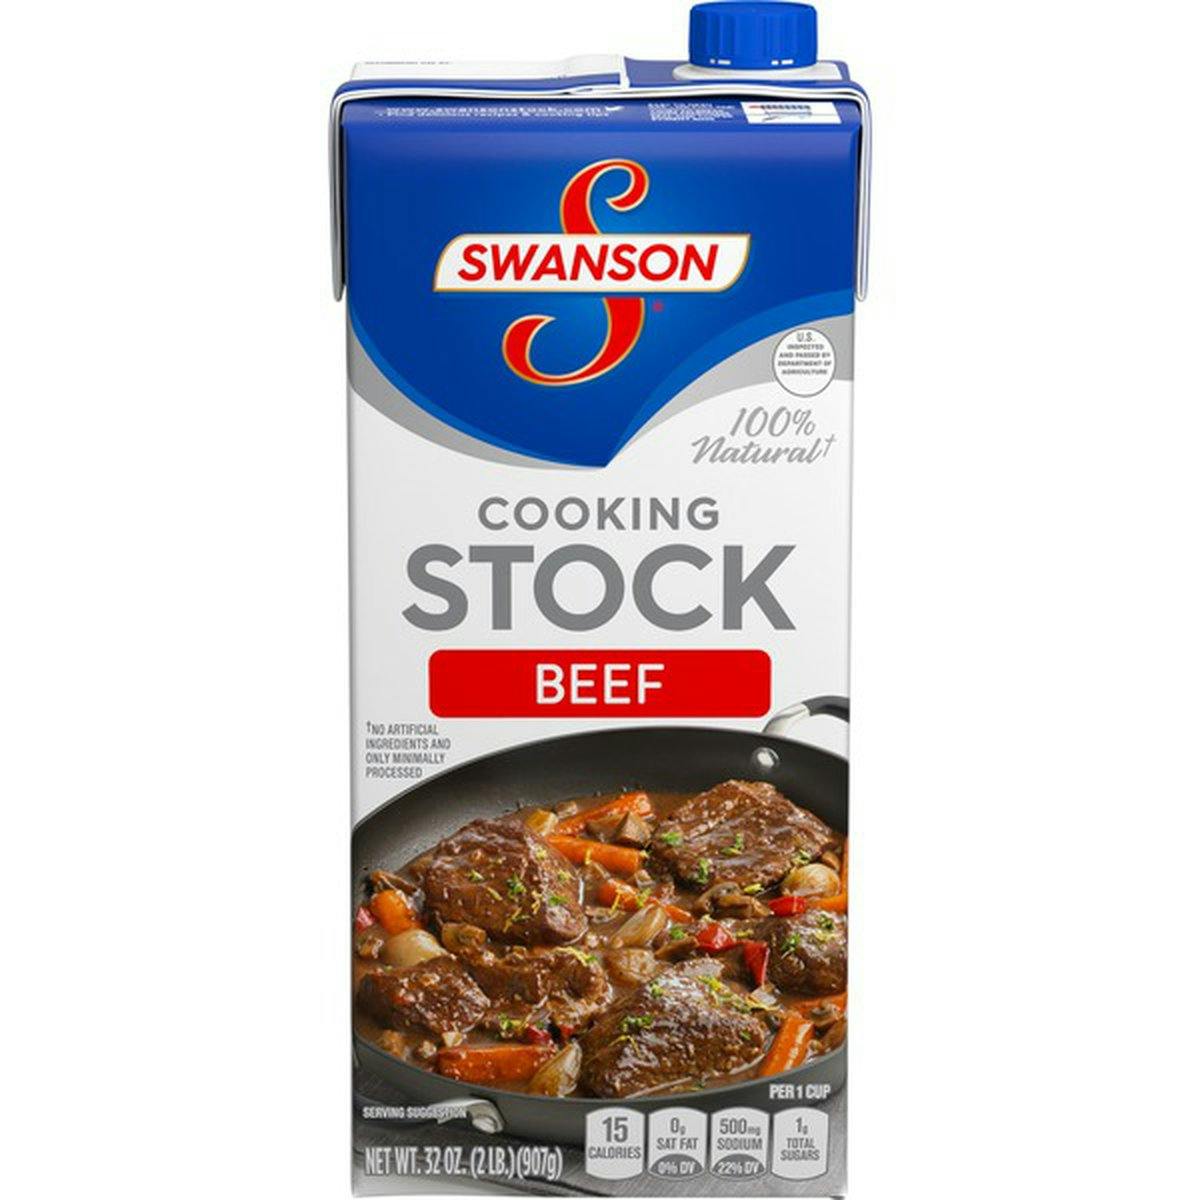 stock (i used chicken and turkey)